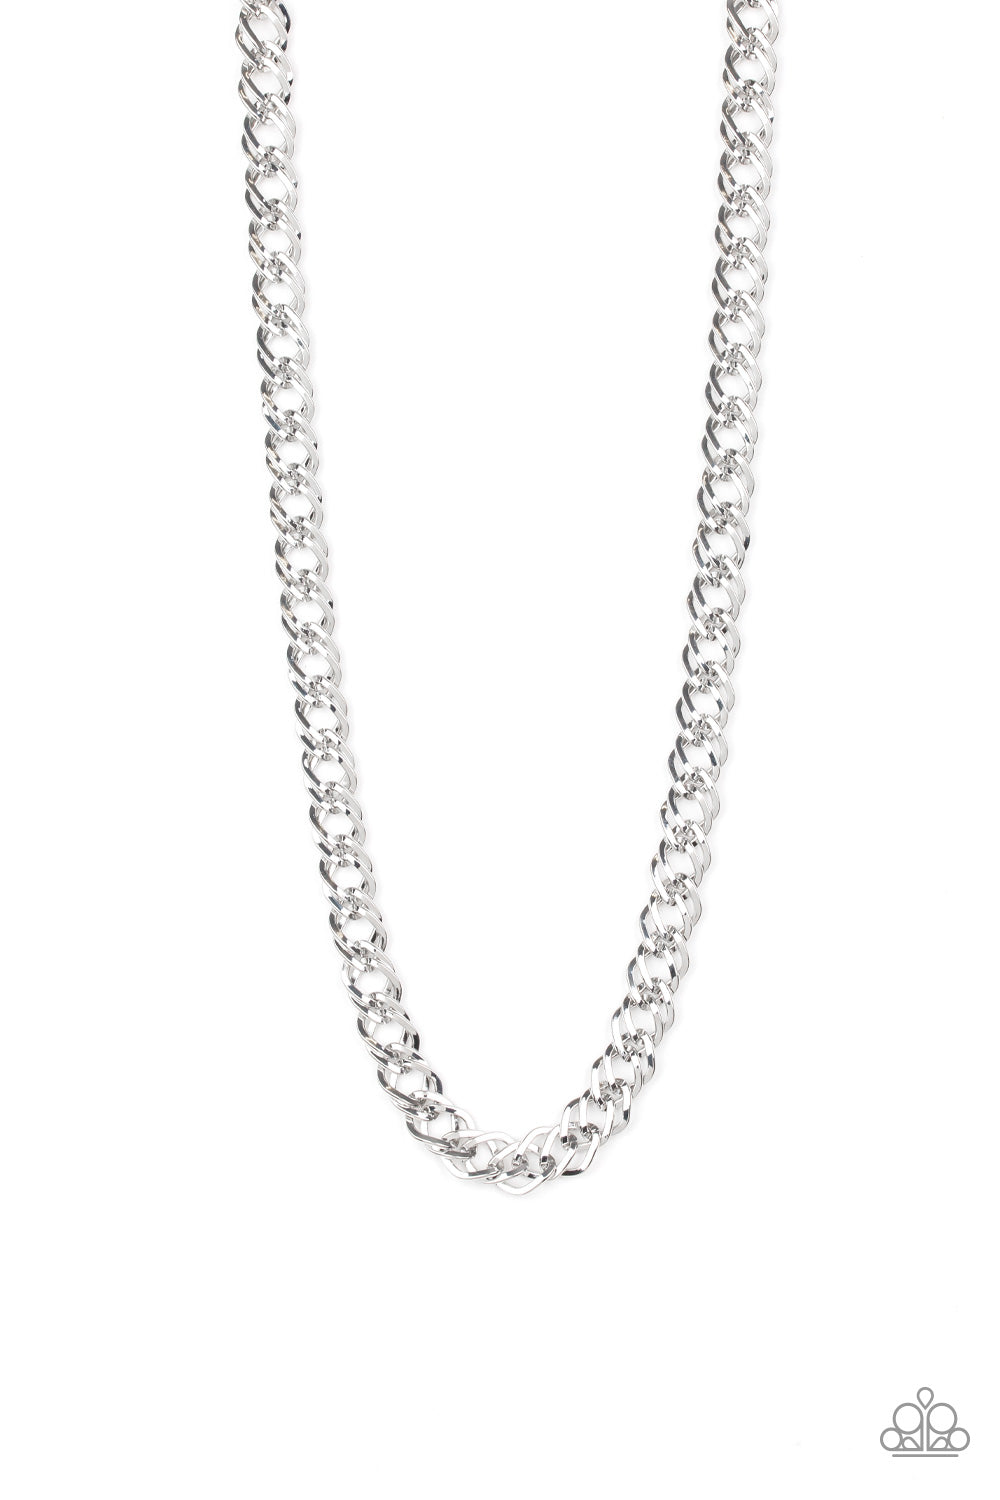 Paparazzi Men Undefeated Chain Necklace - Silver